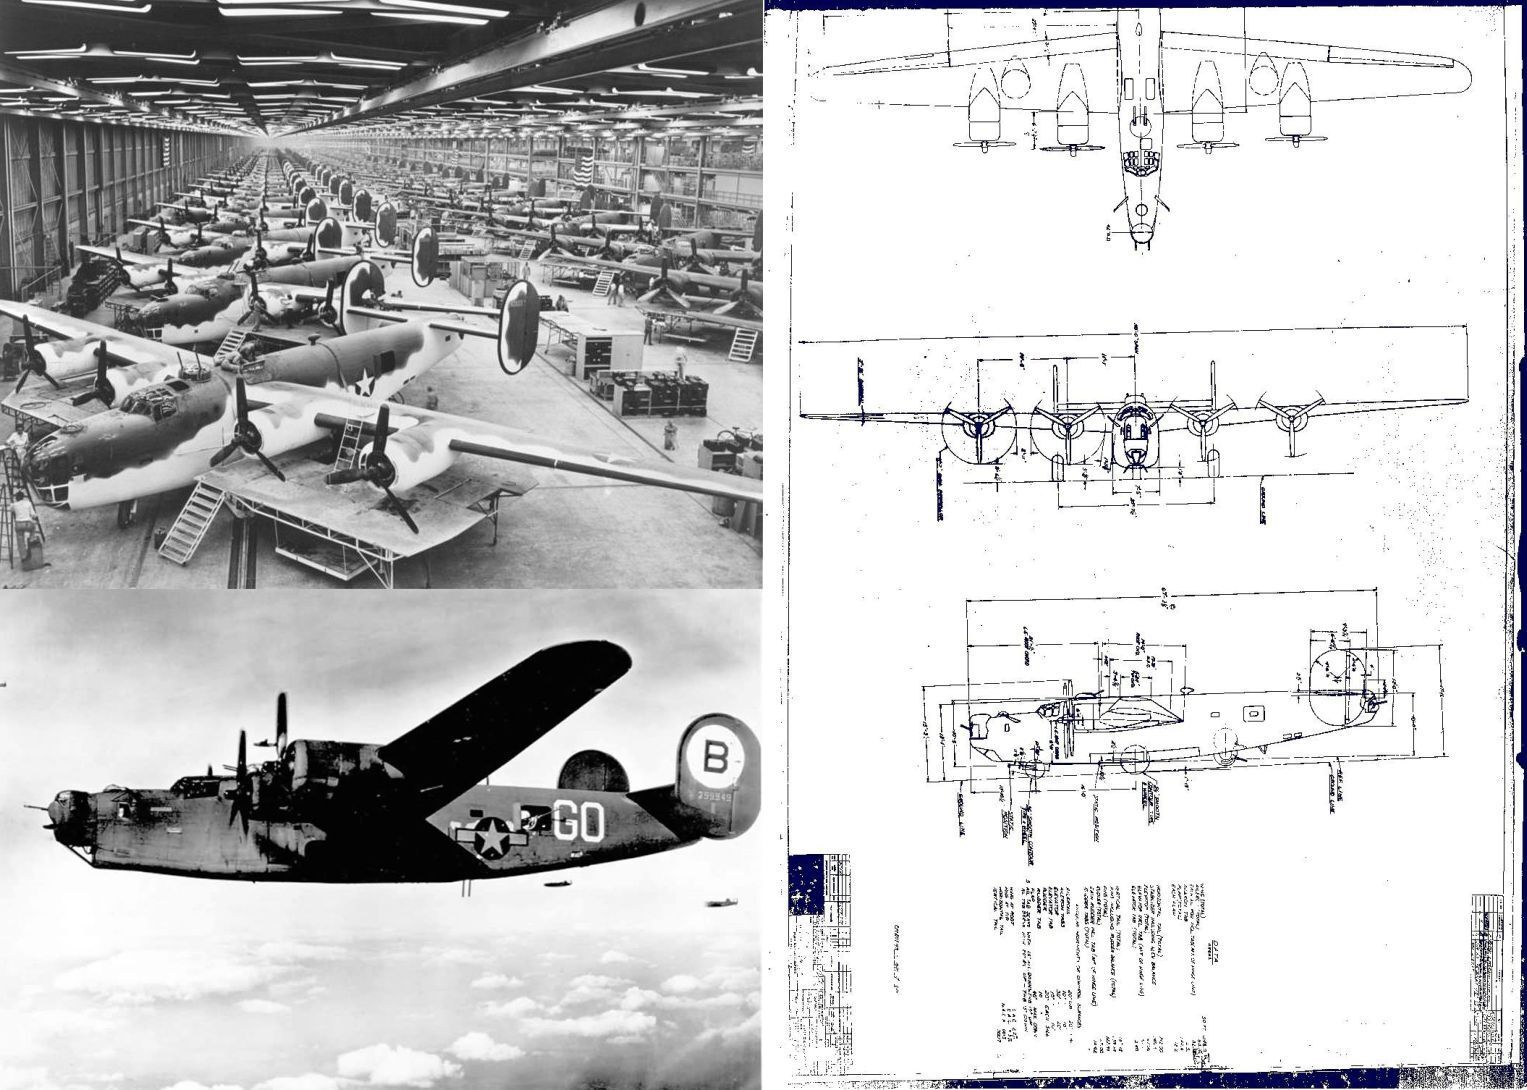  B-24 Liberator Blueprint Plans WW2 period RARE Drawings Consolidated 